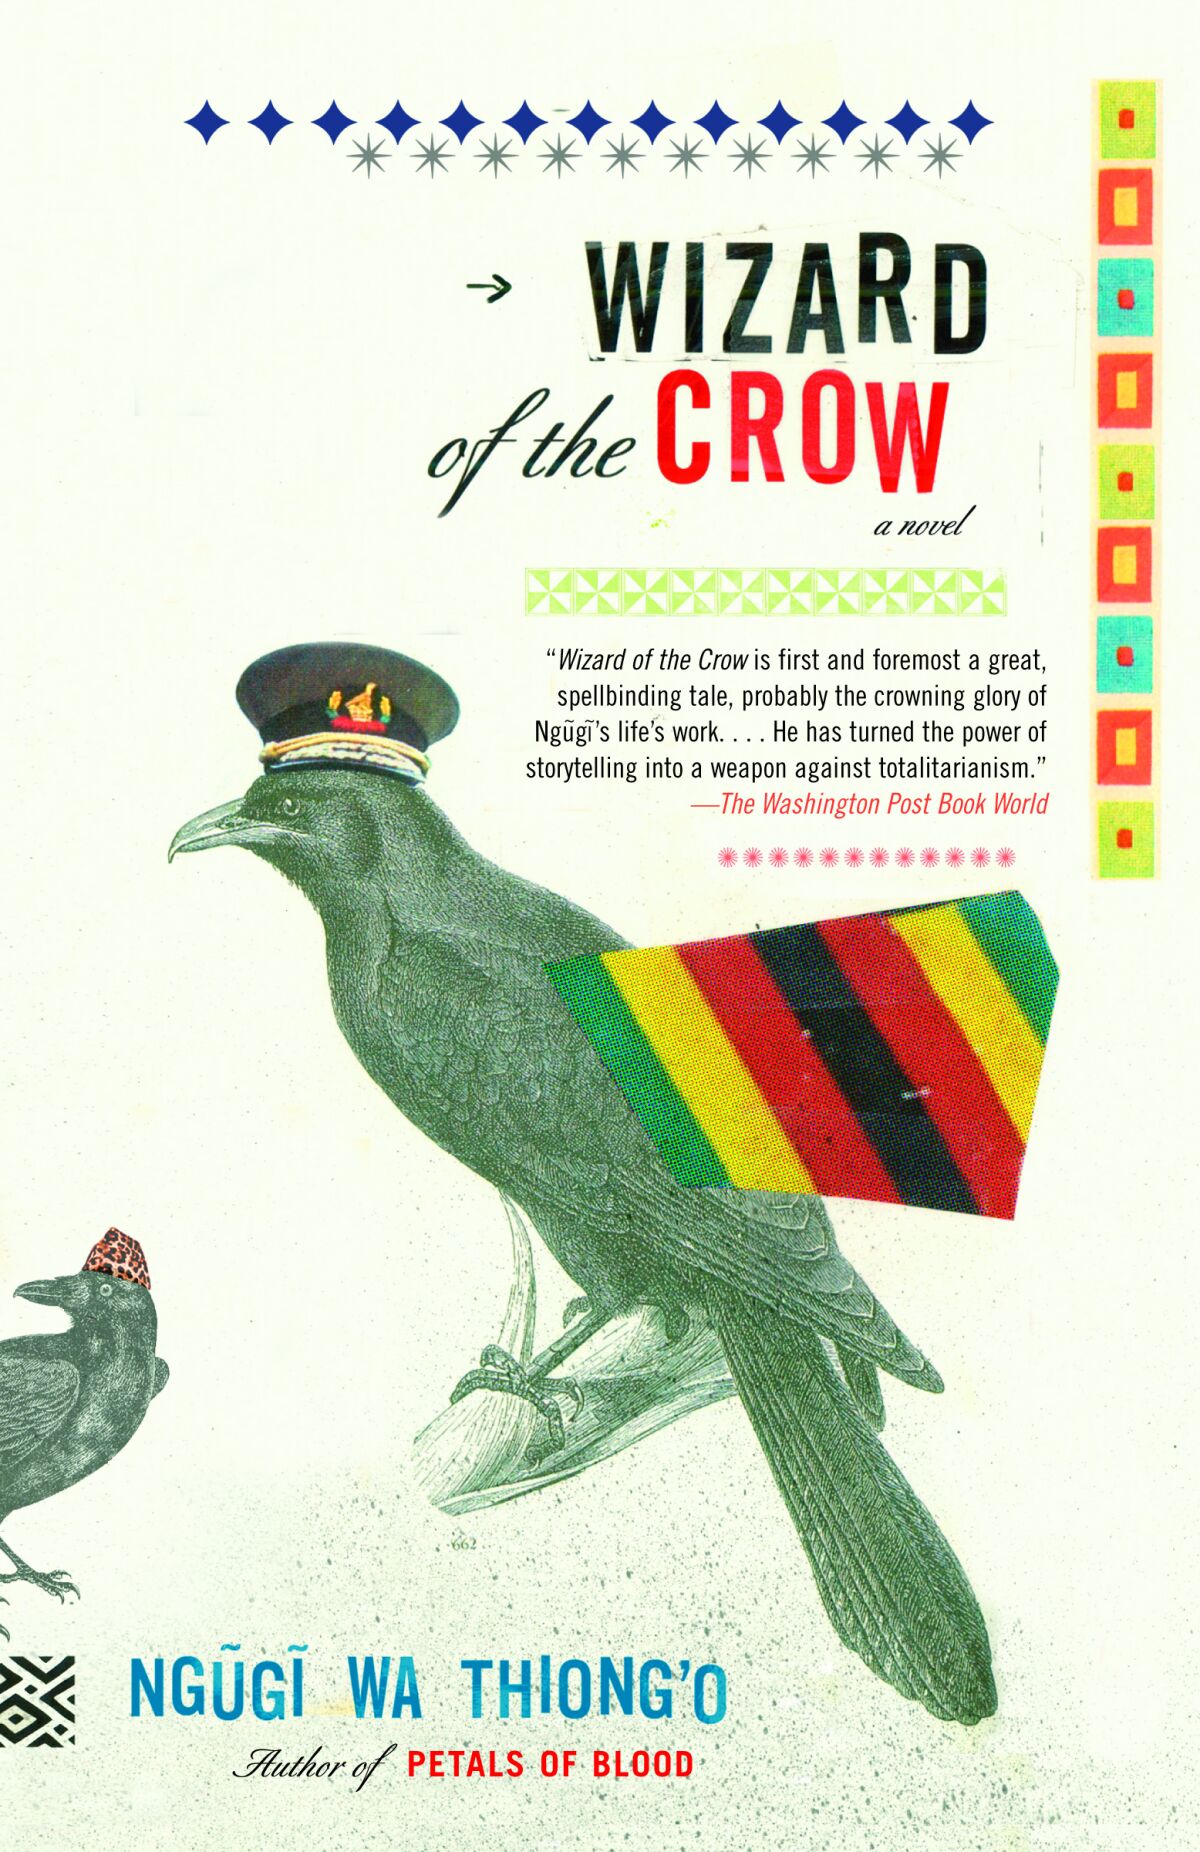 Book jacket for "Wizard of the Crow" By Ngugi wa Thiong'o